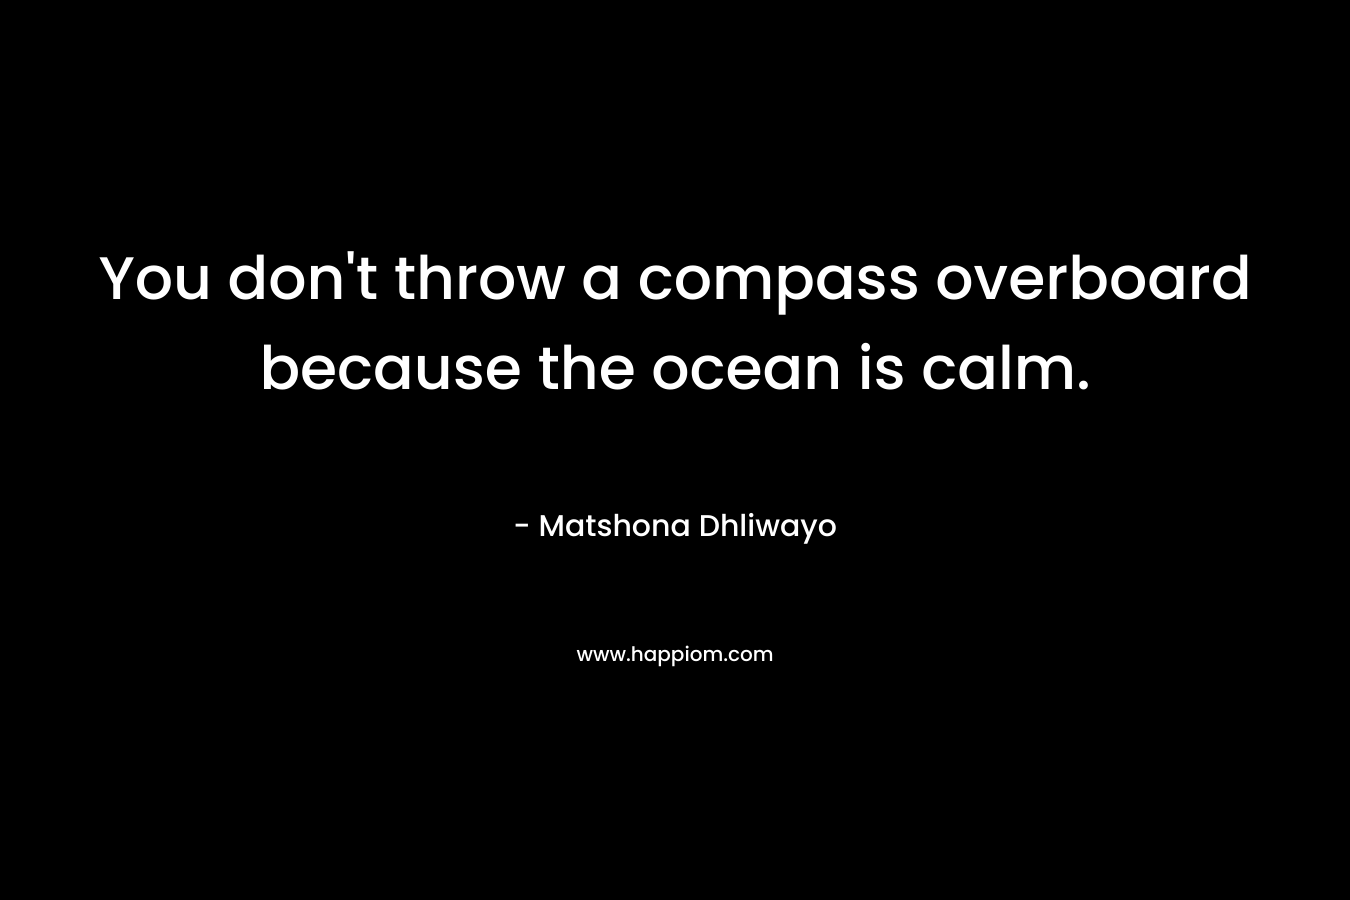 You don't throw a compass overboard because the ocean is calm.